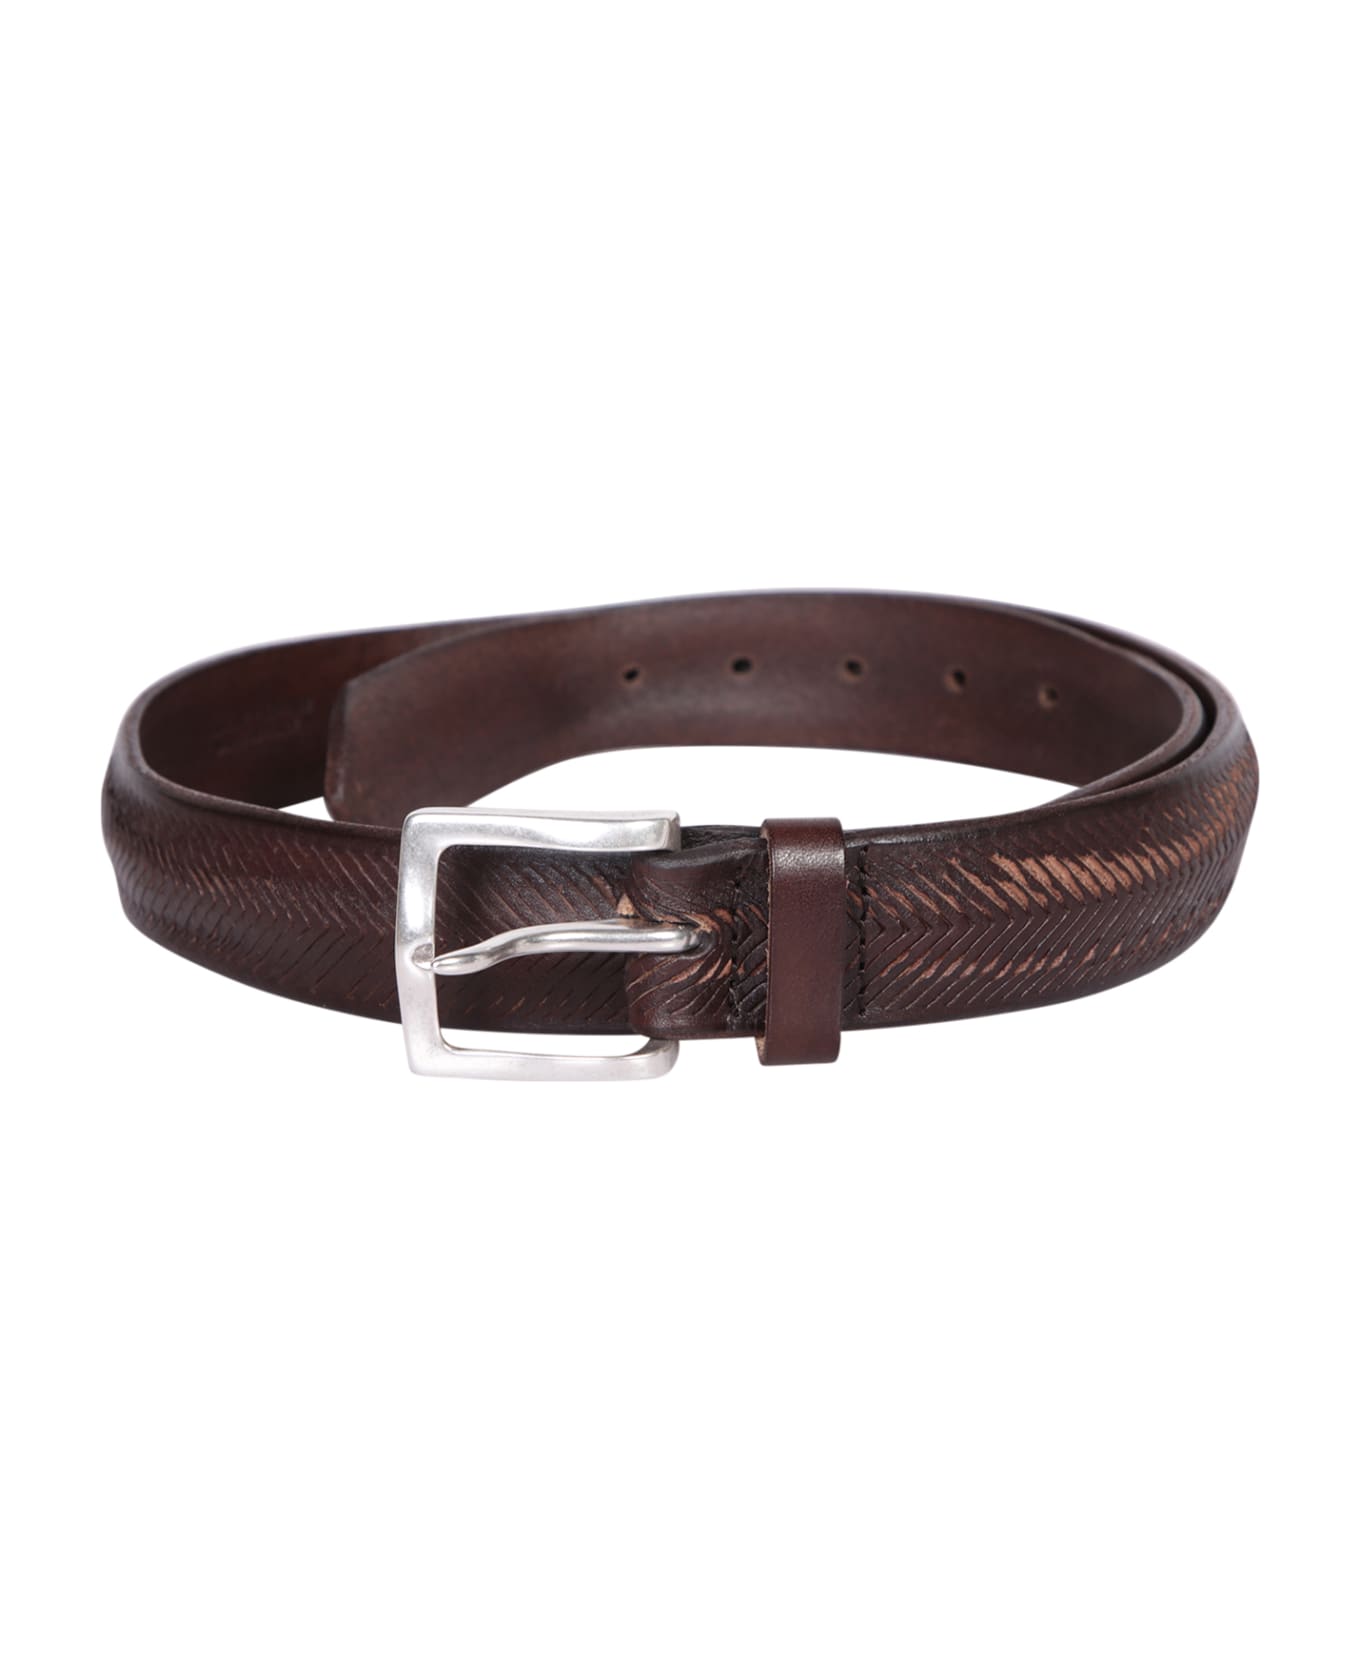 Orciani Masculine Down Brown Belt - Brown